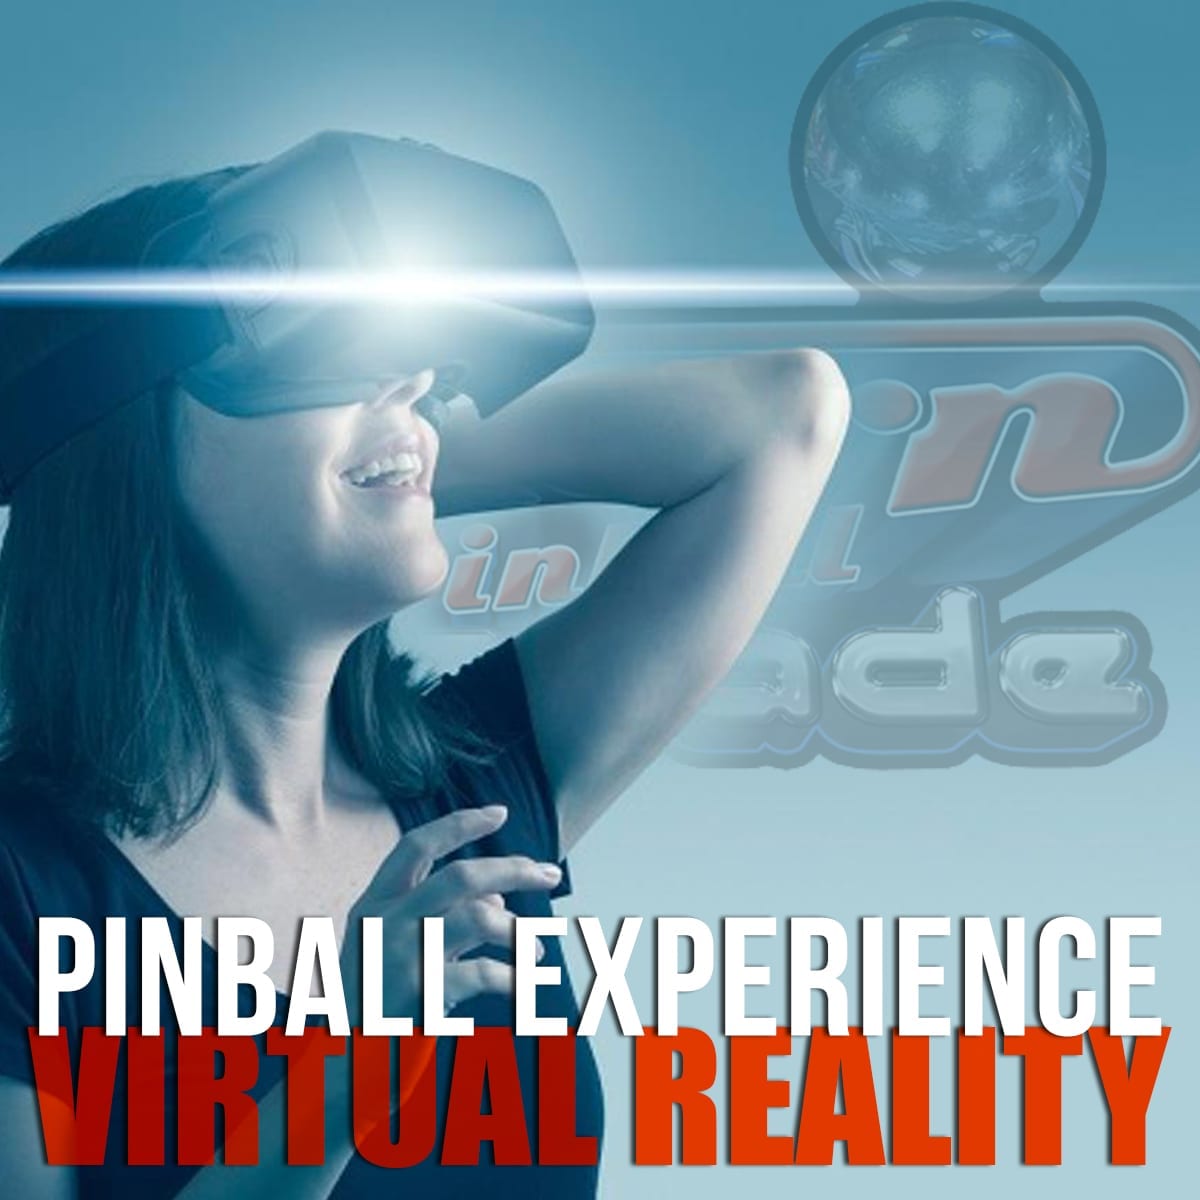 Pinball Experience in Virtual Reality